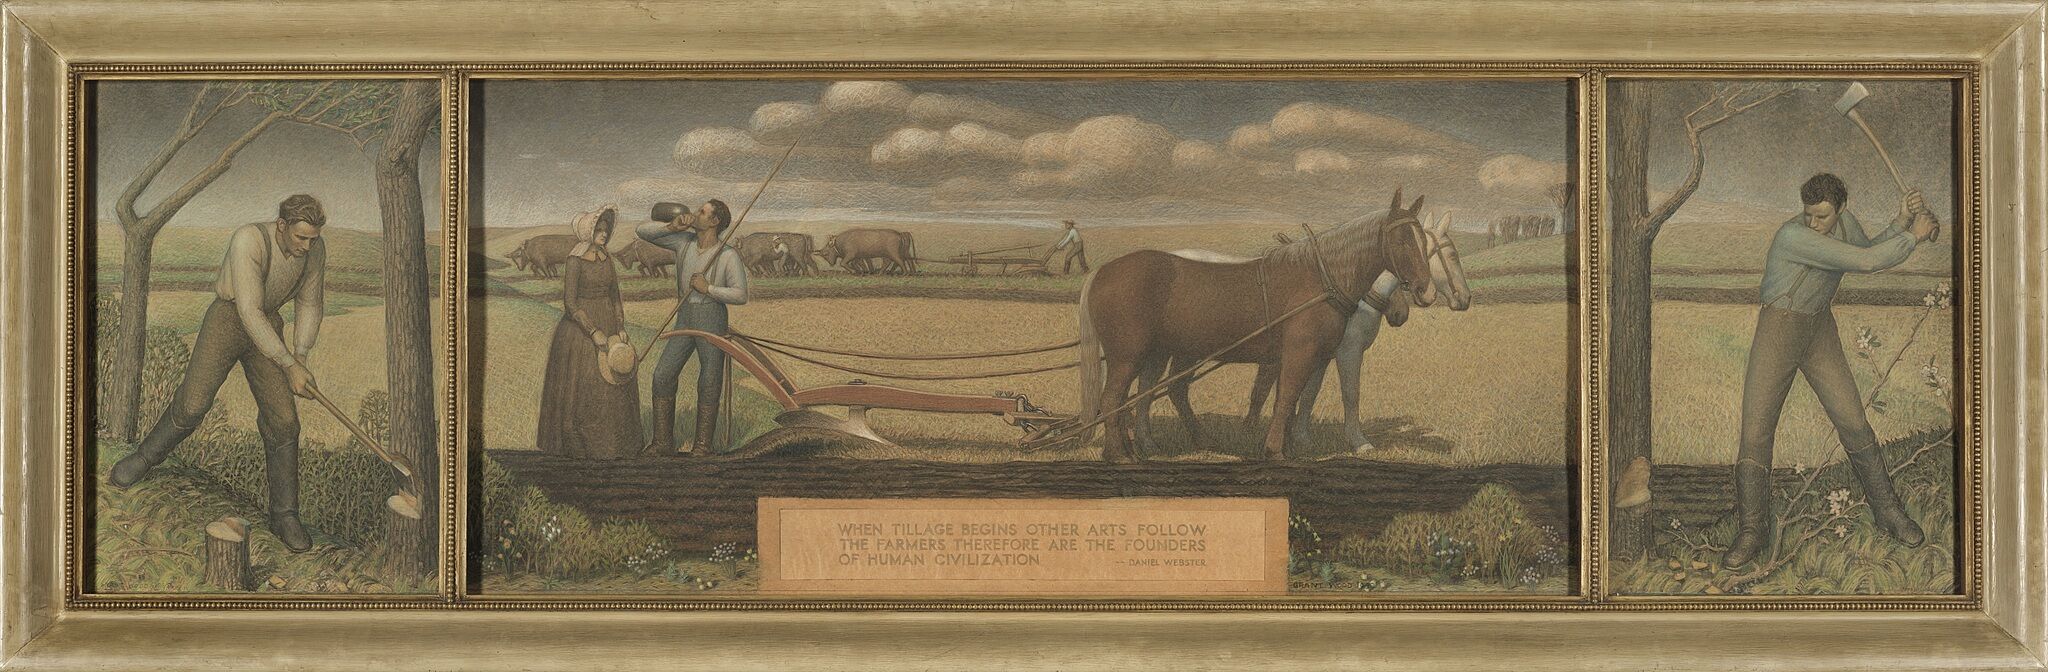 Drawing of two men breaking prairie, another stands holding the reigns of a horse and speaking to a woman.